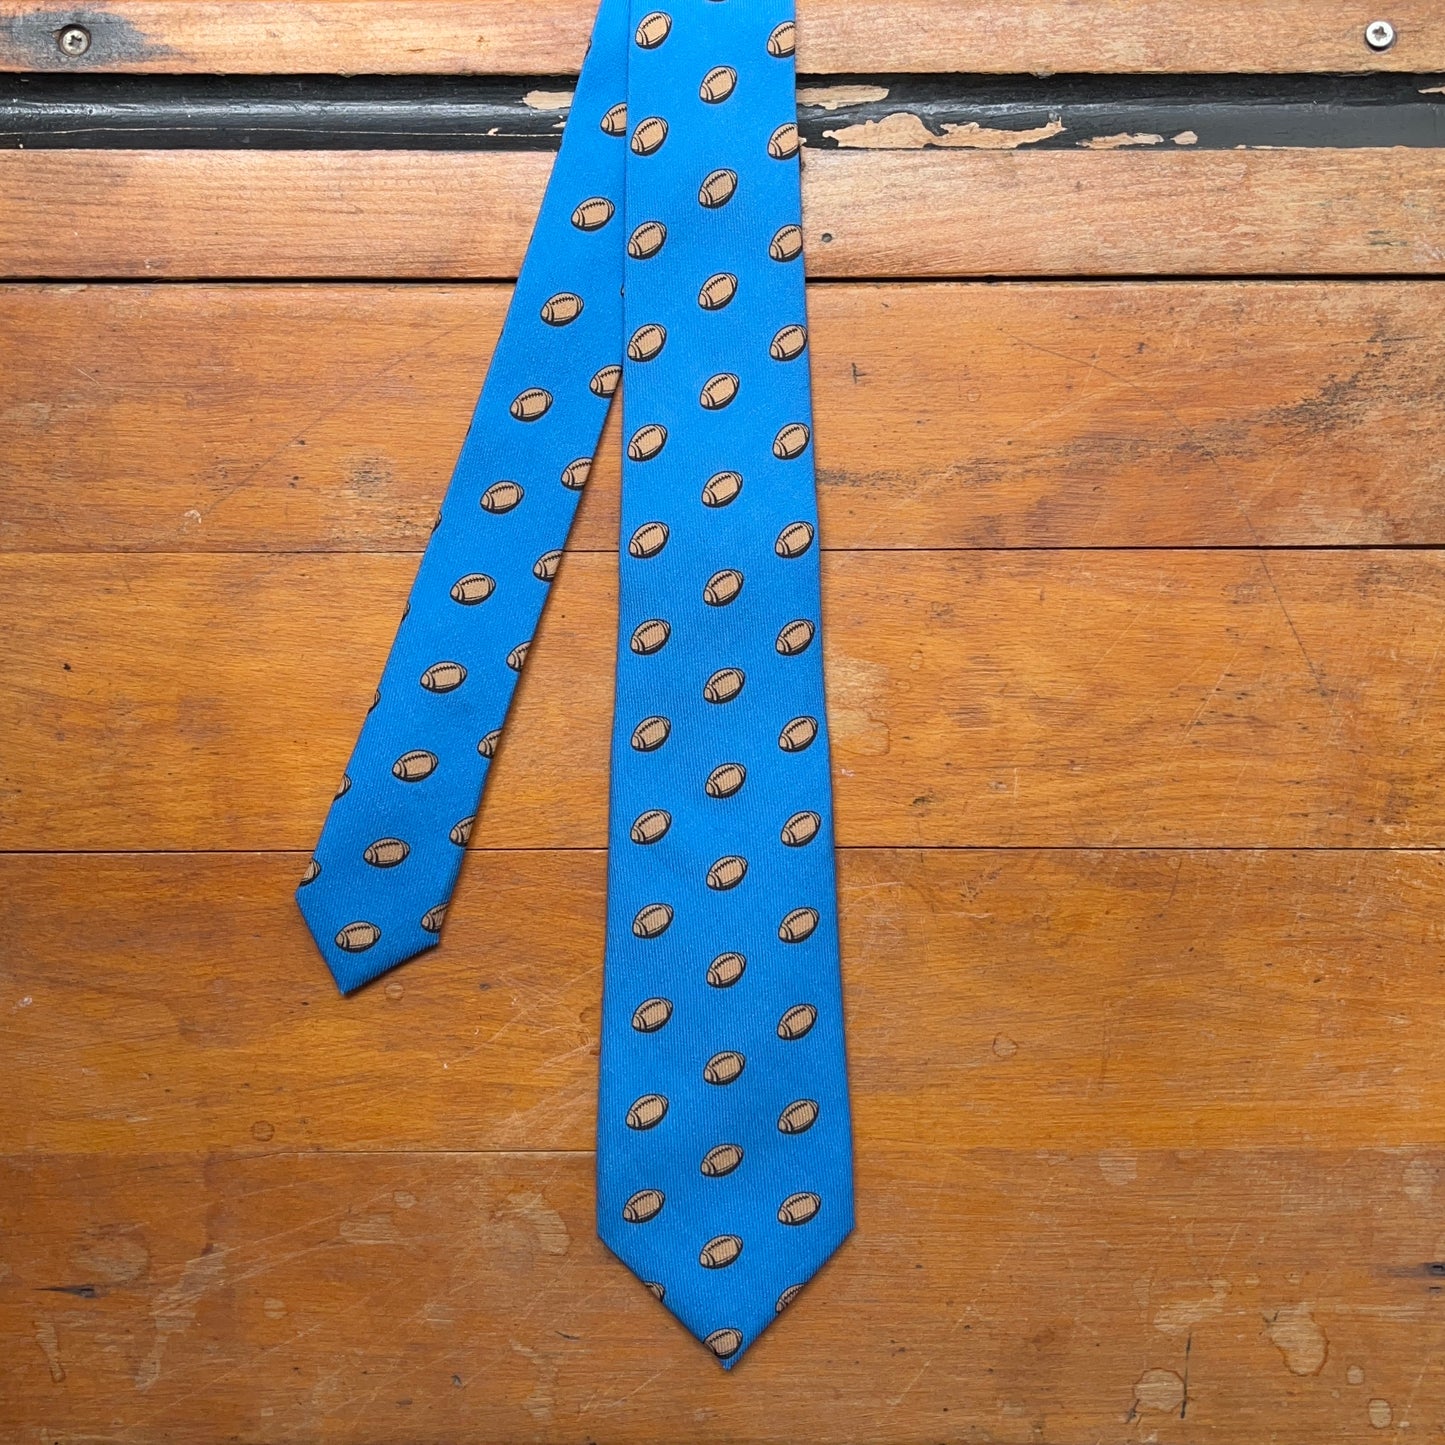 Blue regent tie made from woven wool with rugby ball print pattern